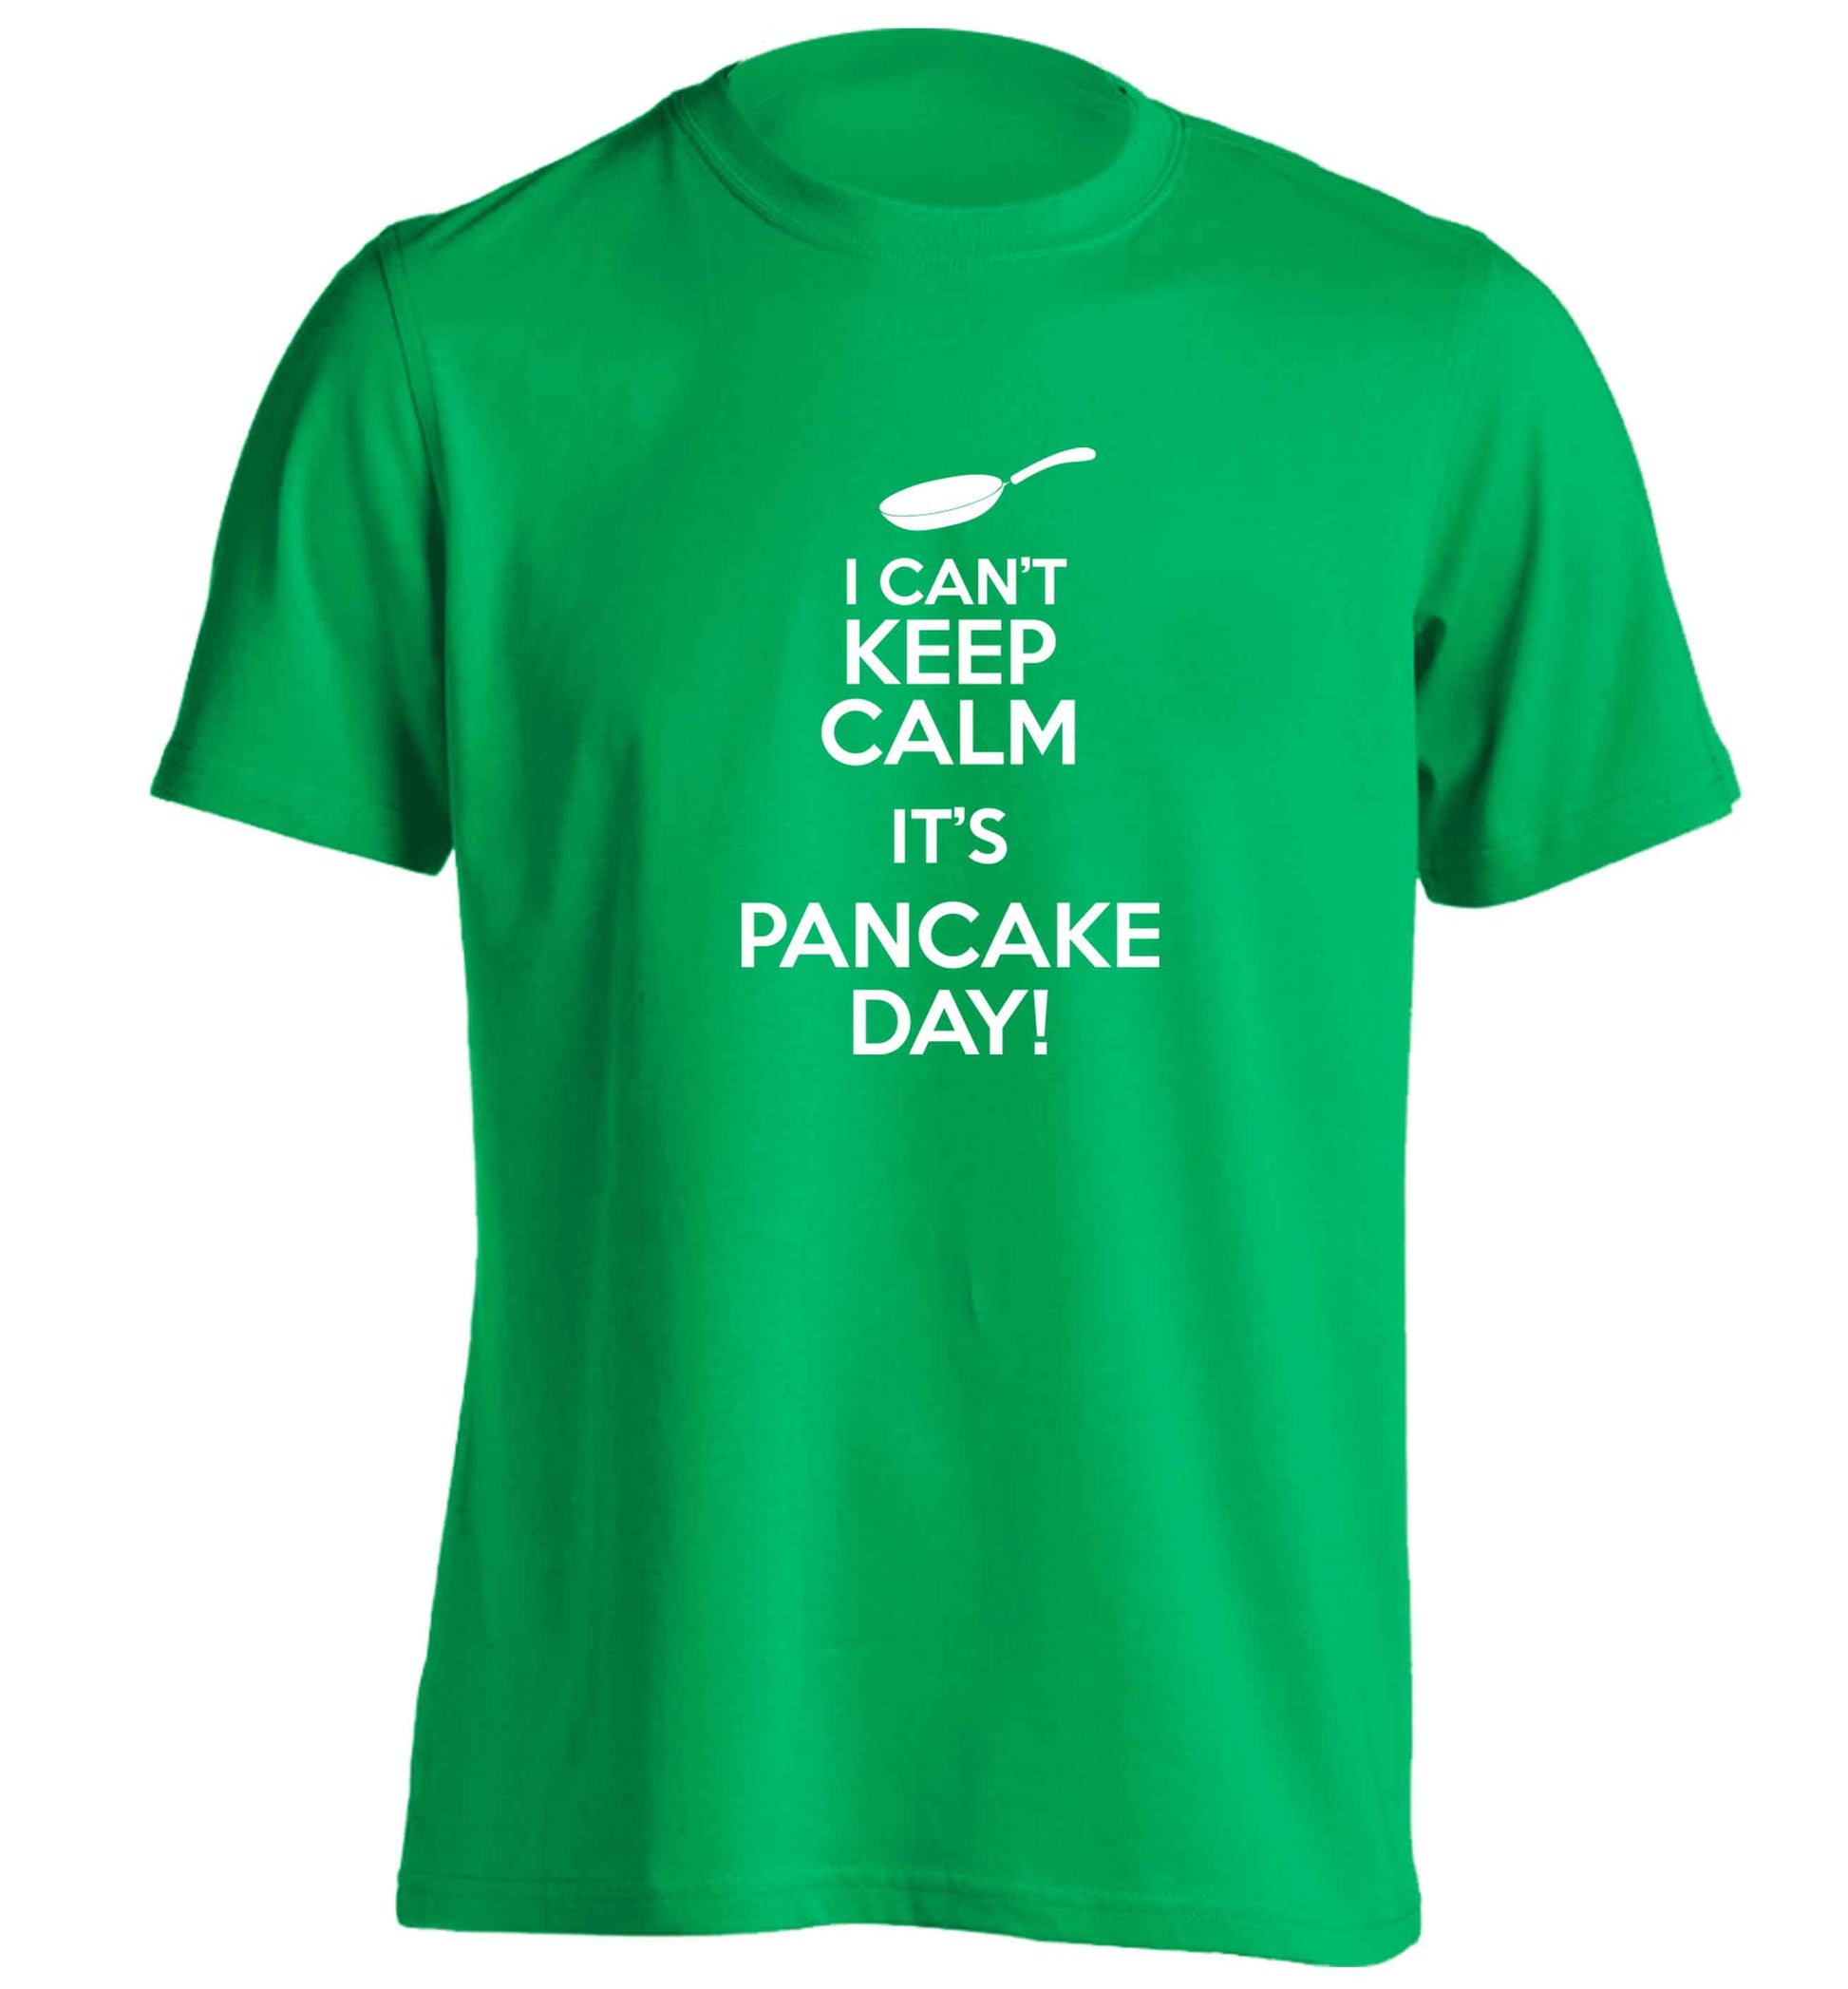 I can't keep calm it's pancake day! adults unisex green Tshirt 2XL